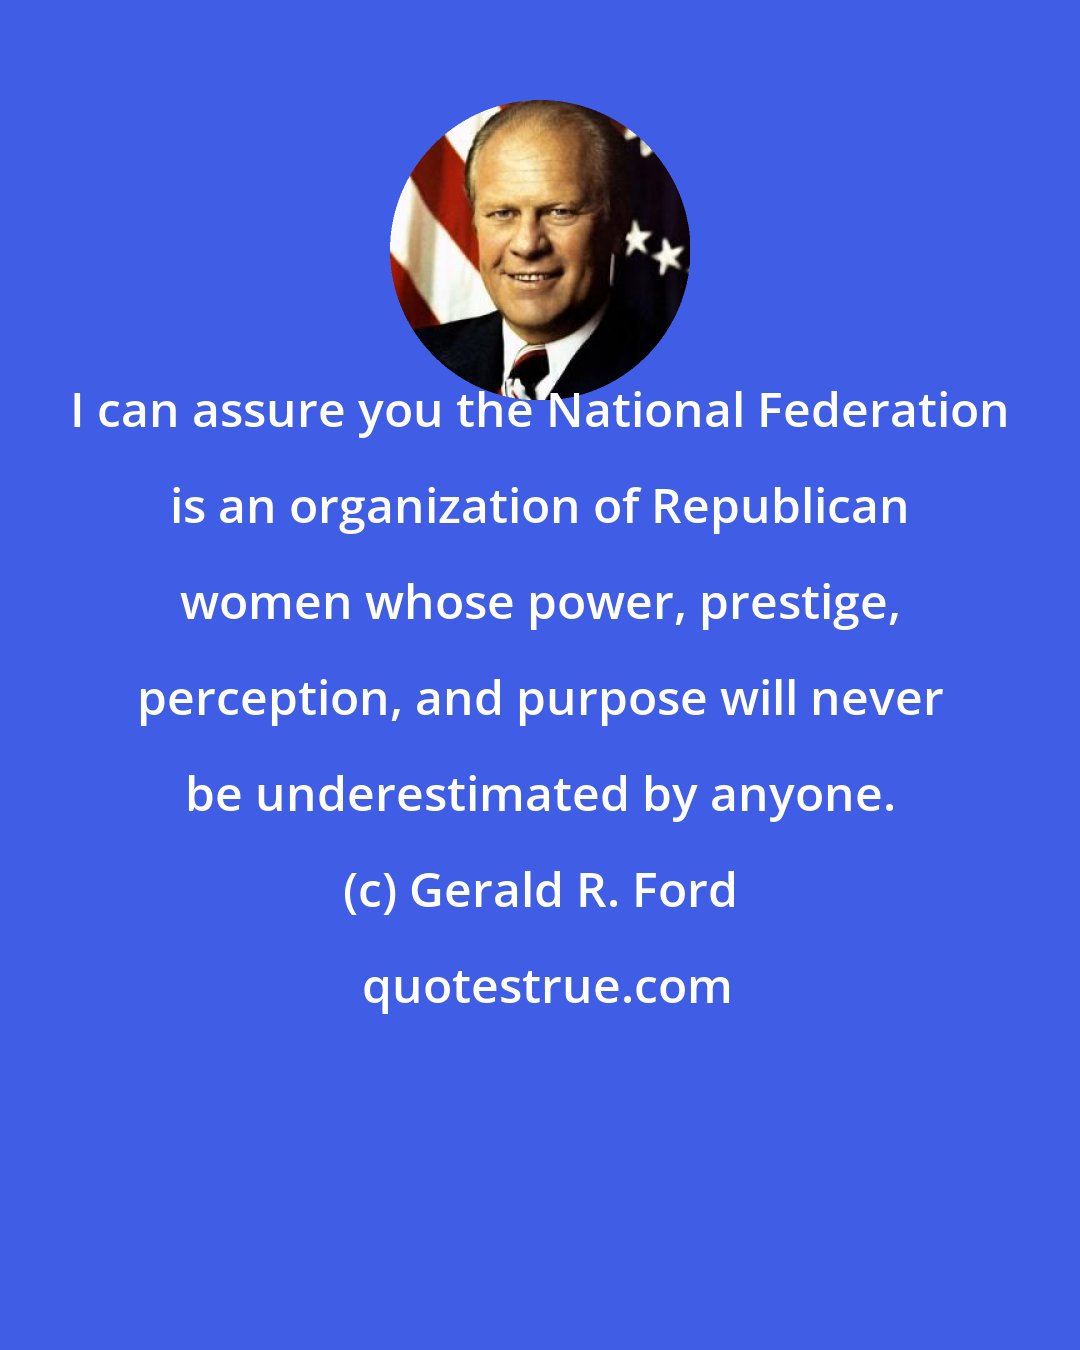 Gerald R. Ford: I can assure you the National Federation is an organization of Republican women whose power, prestige, perception, and purpose will never be underestimated by anyone.